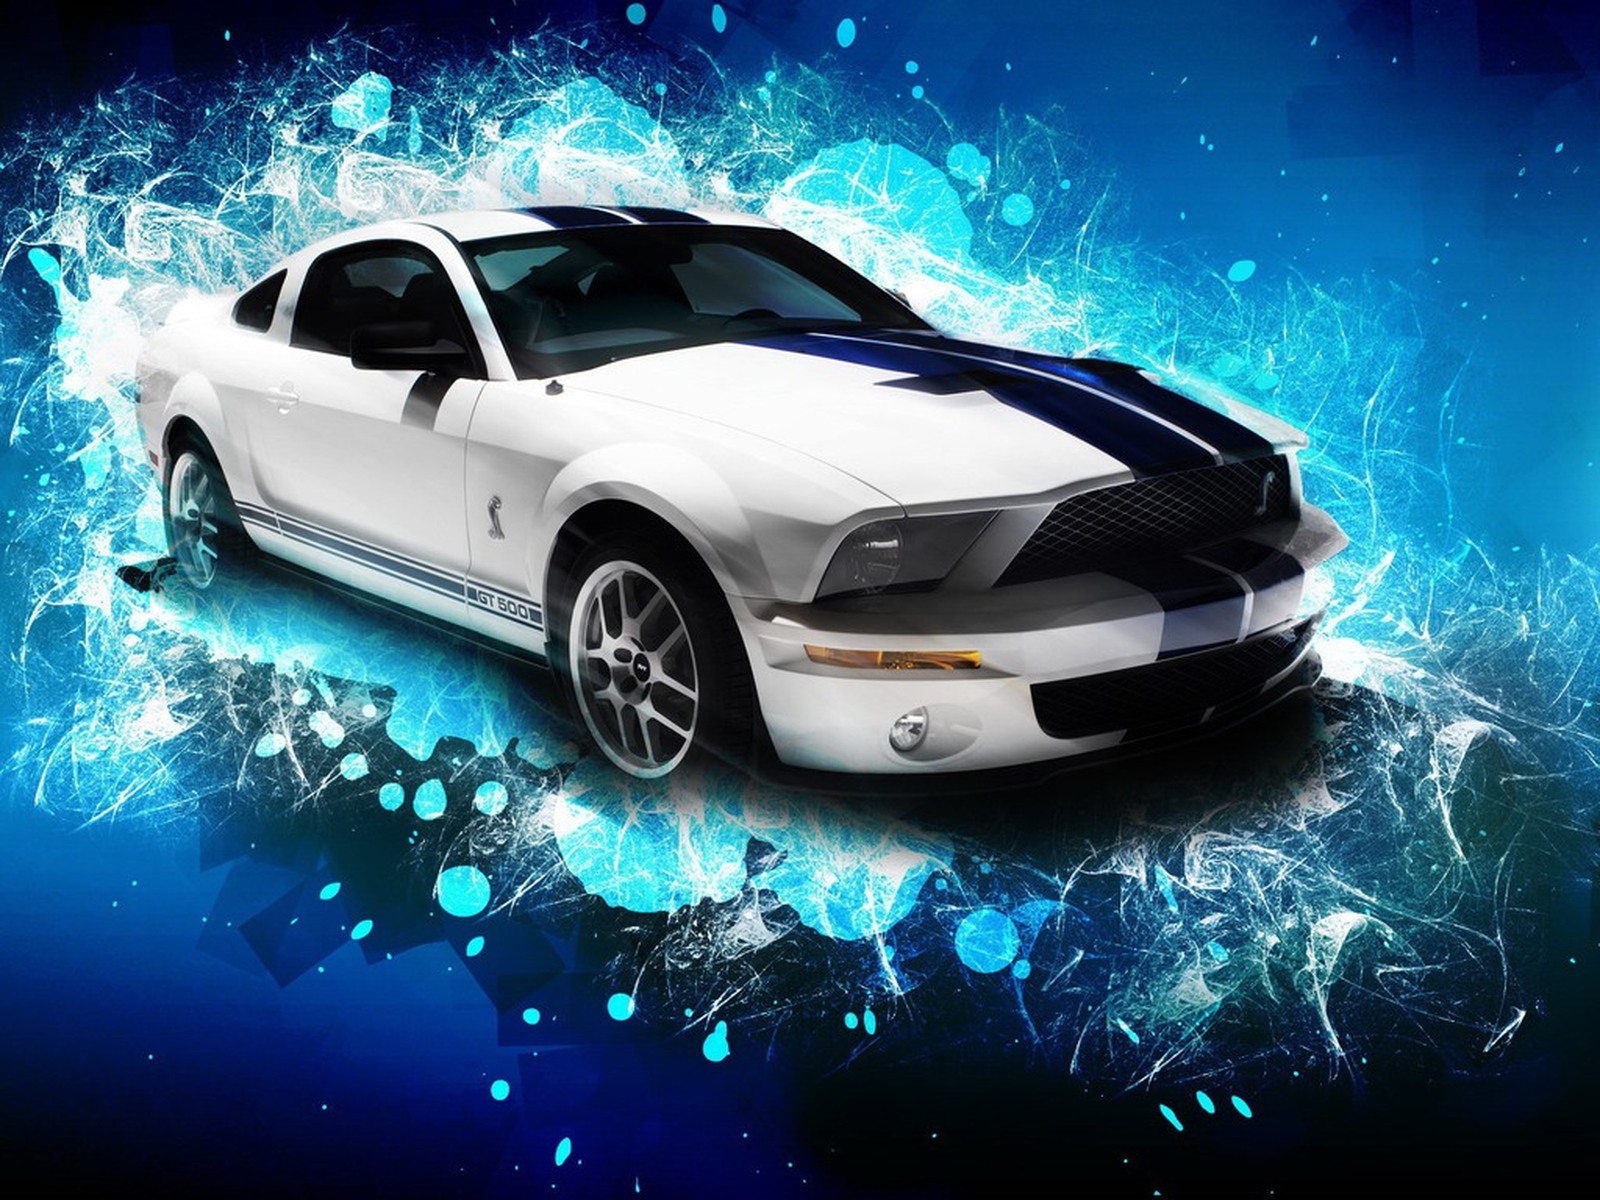 Cars wallpapers Auto_wallpaper_003